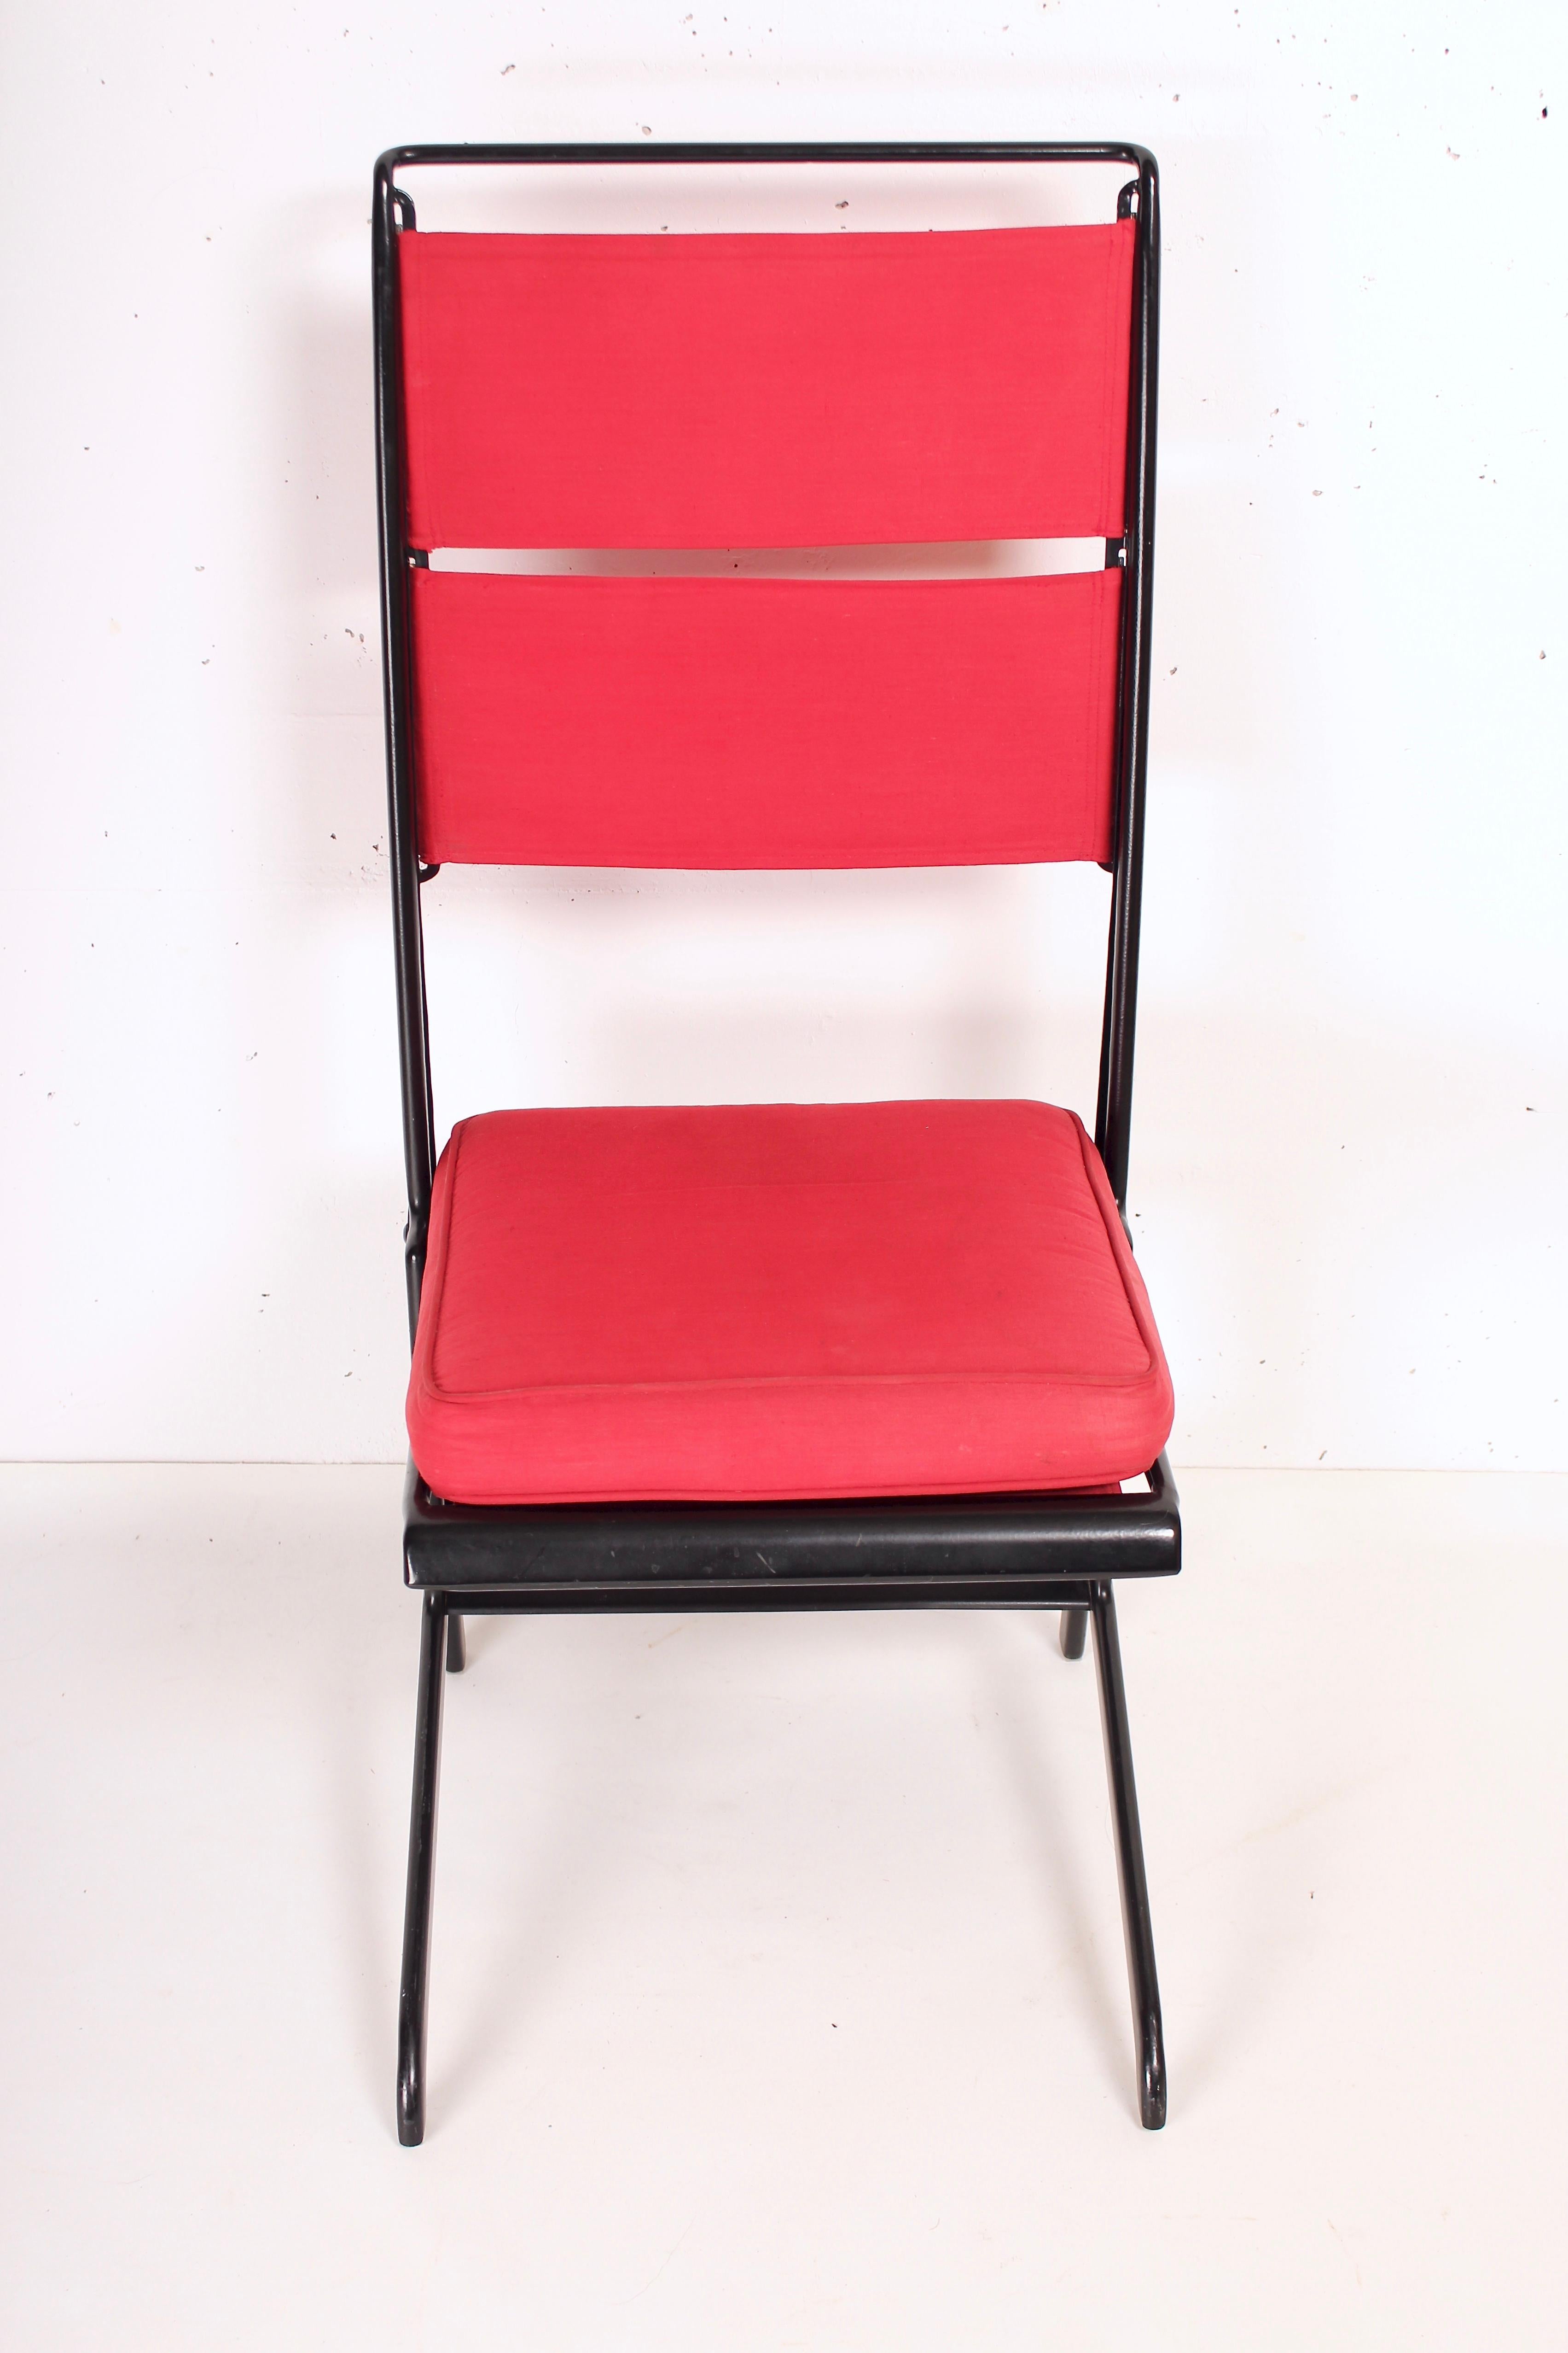 Jean Prouvé Folding Chair Designed 1930, Manufactured by Tecta, 1983 In Good Condition For Sale In Santa Gertrudis, Baleares